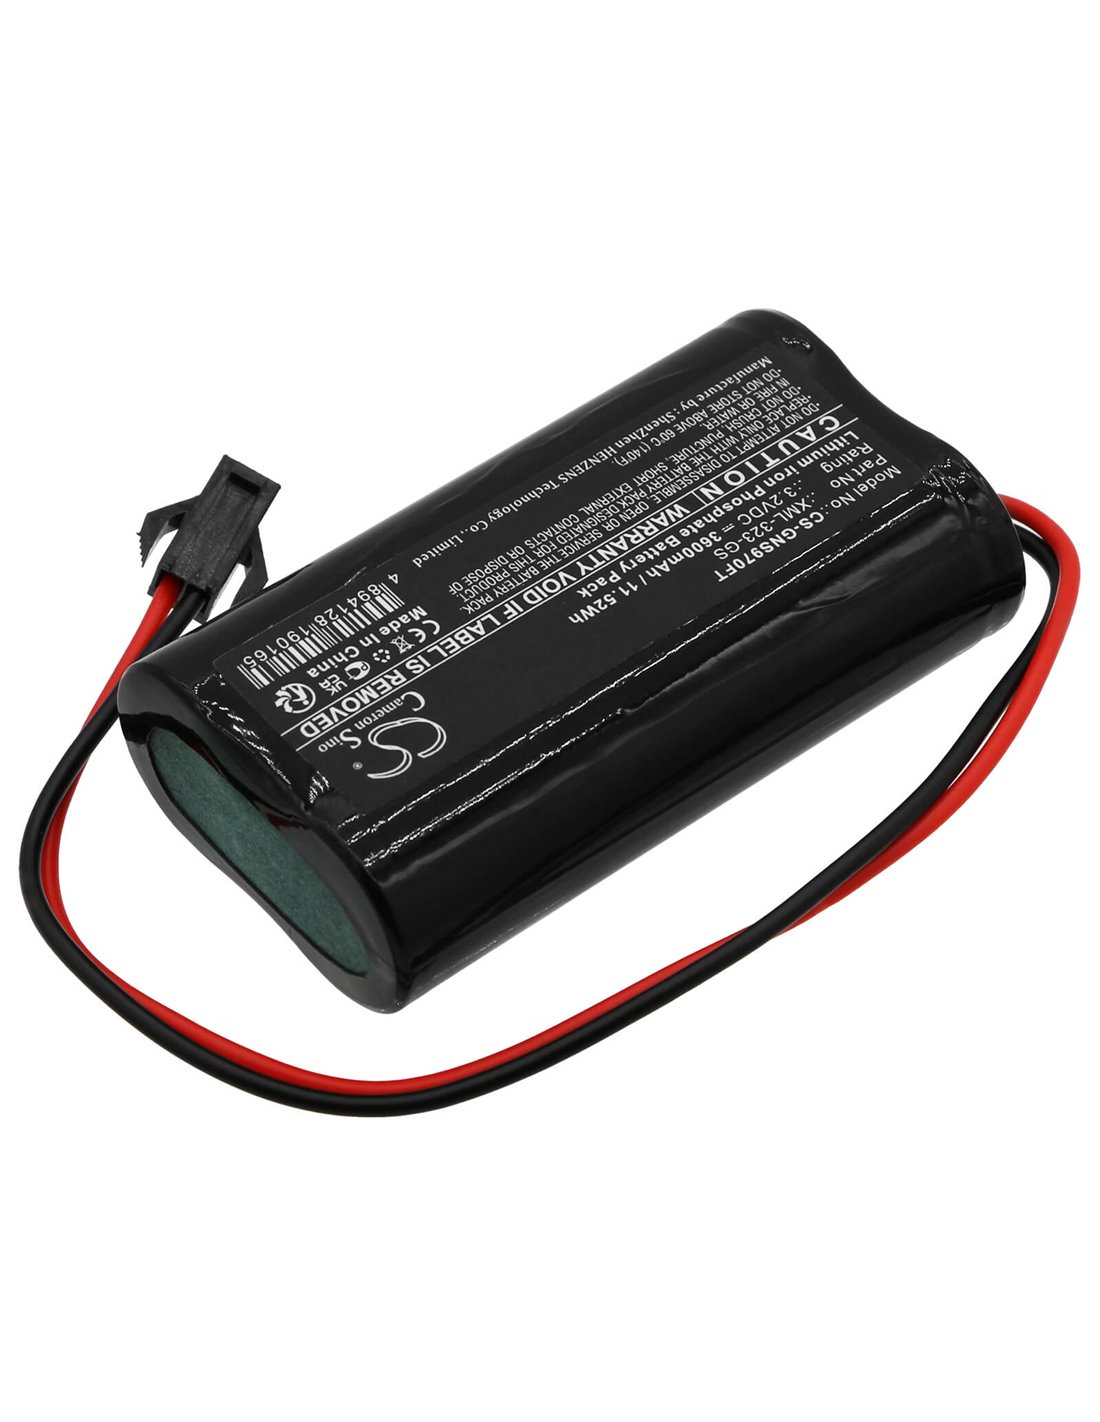 3.2V, LiFePO4, 3600mAh , Battery fits Gama Sonic Gs-103, Gs-104, Gs-94, 11.52Wh